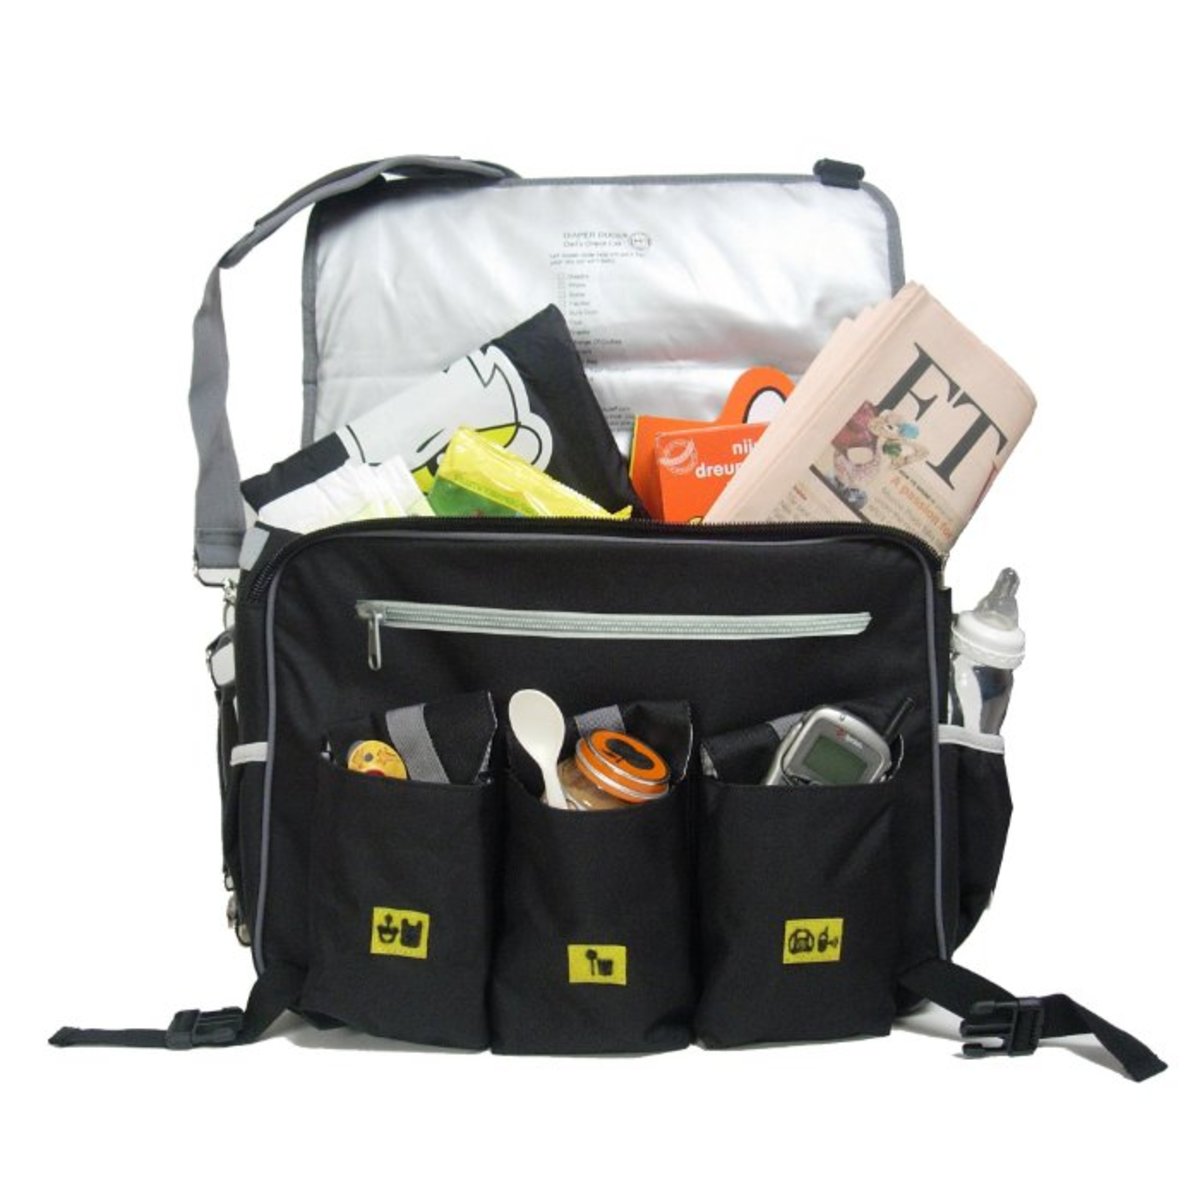 Best Diaper Bags for Twins, Two Kids & Multiple Children | 2015 Reviews | hubpages